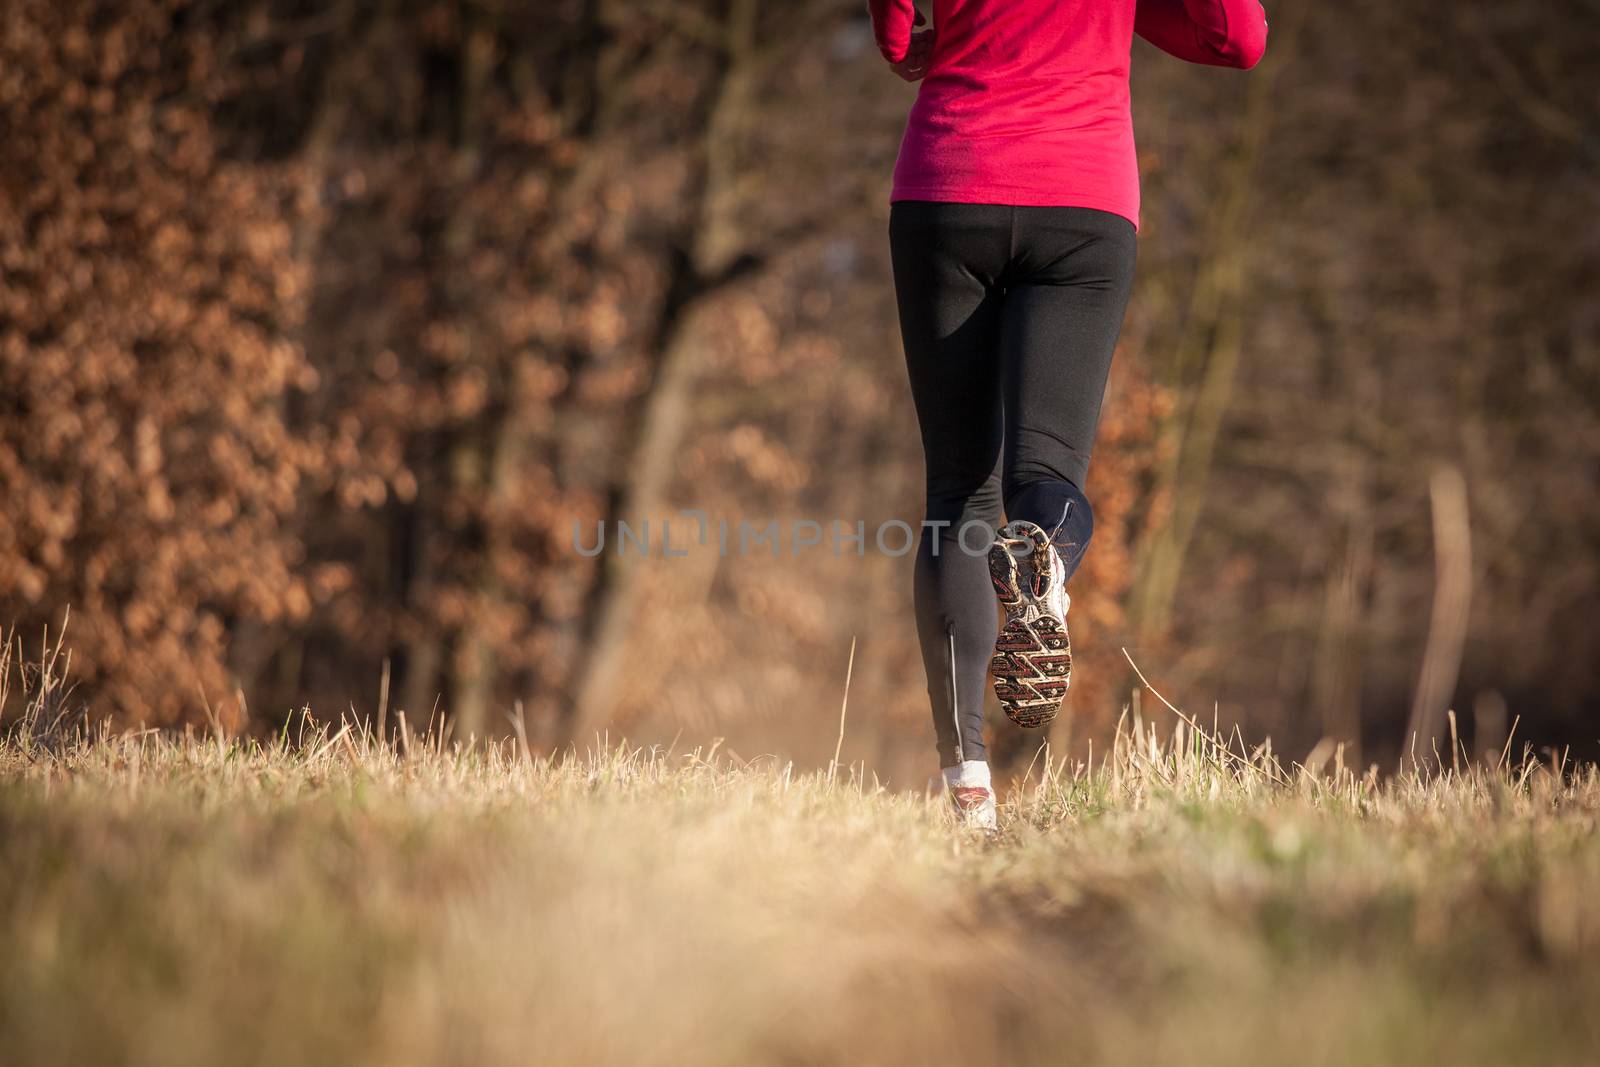 Young woman running outdoors on a lovely sunny winter/fall day (motion blurred image)